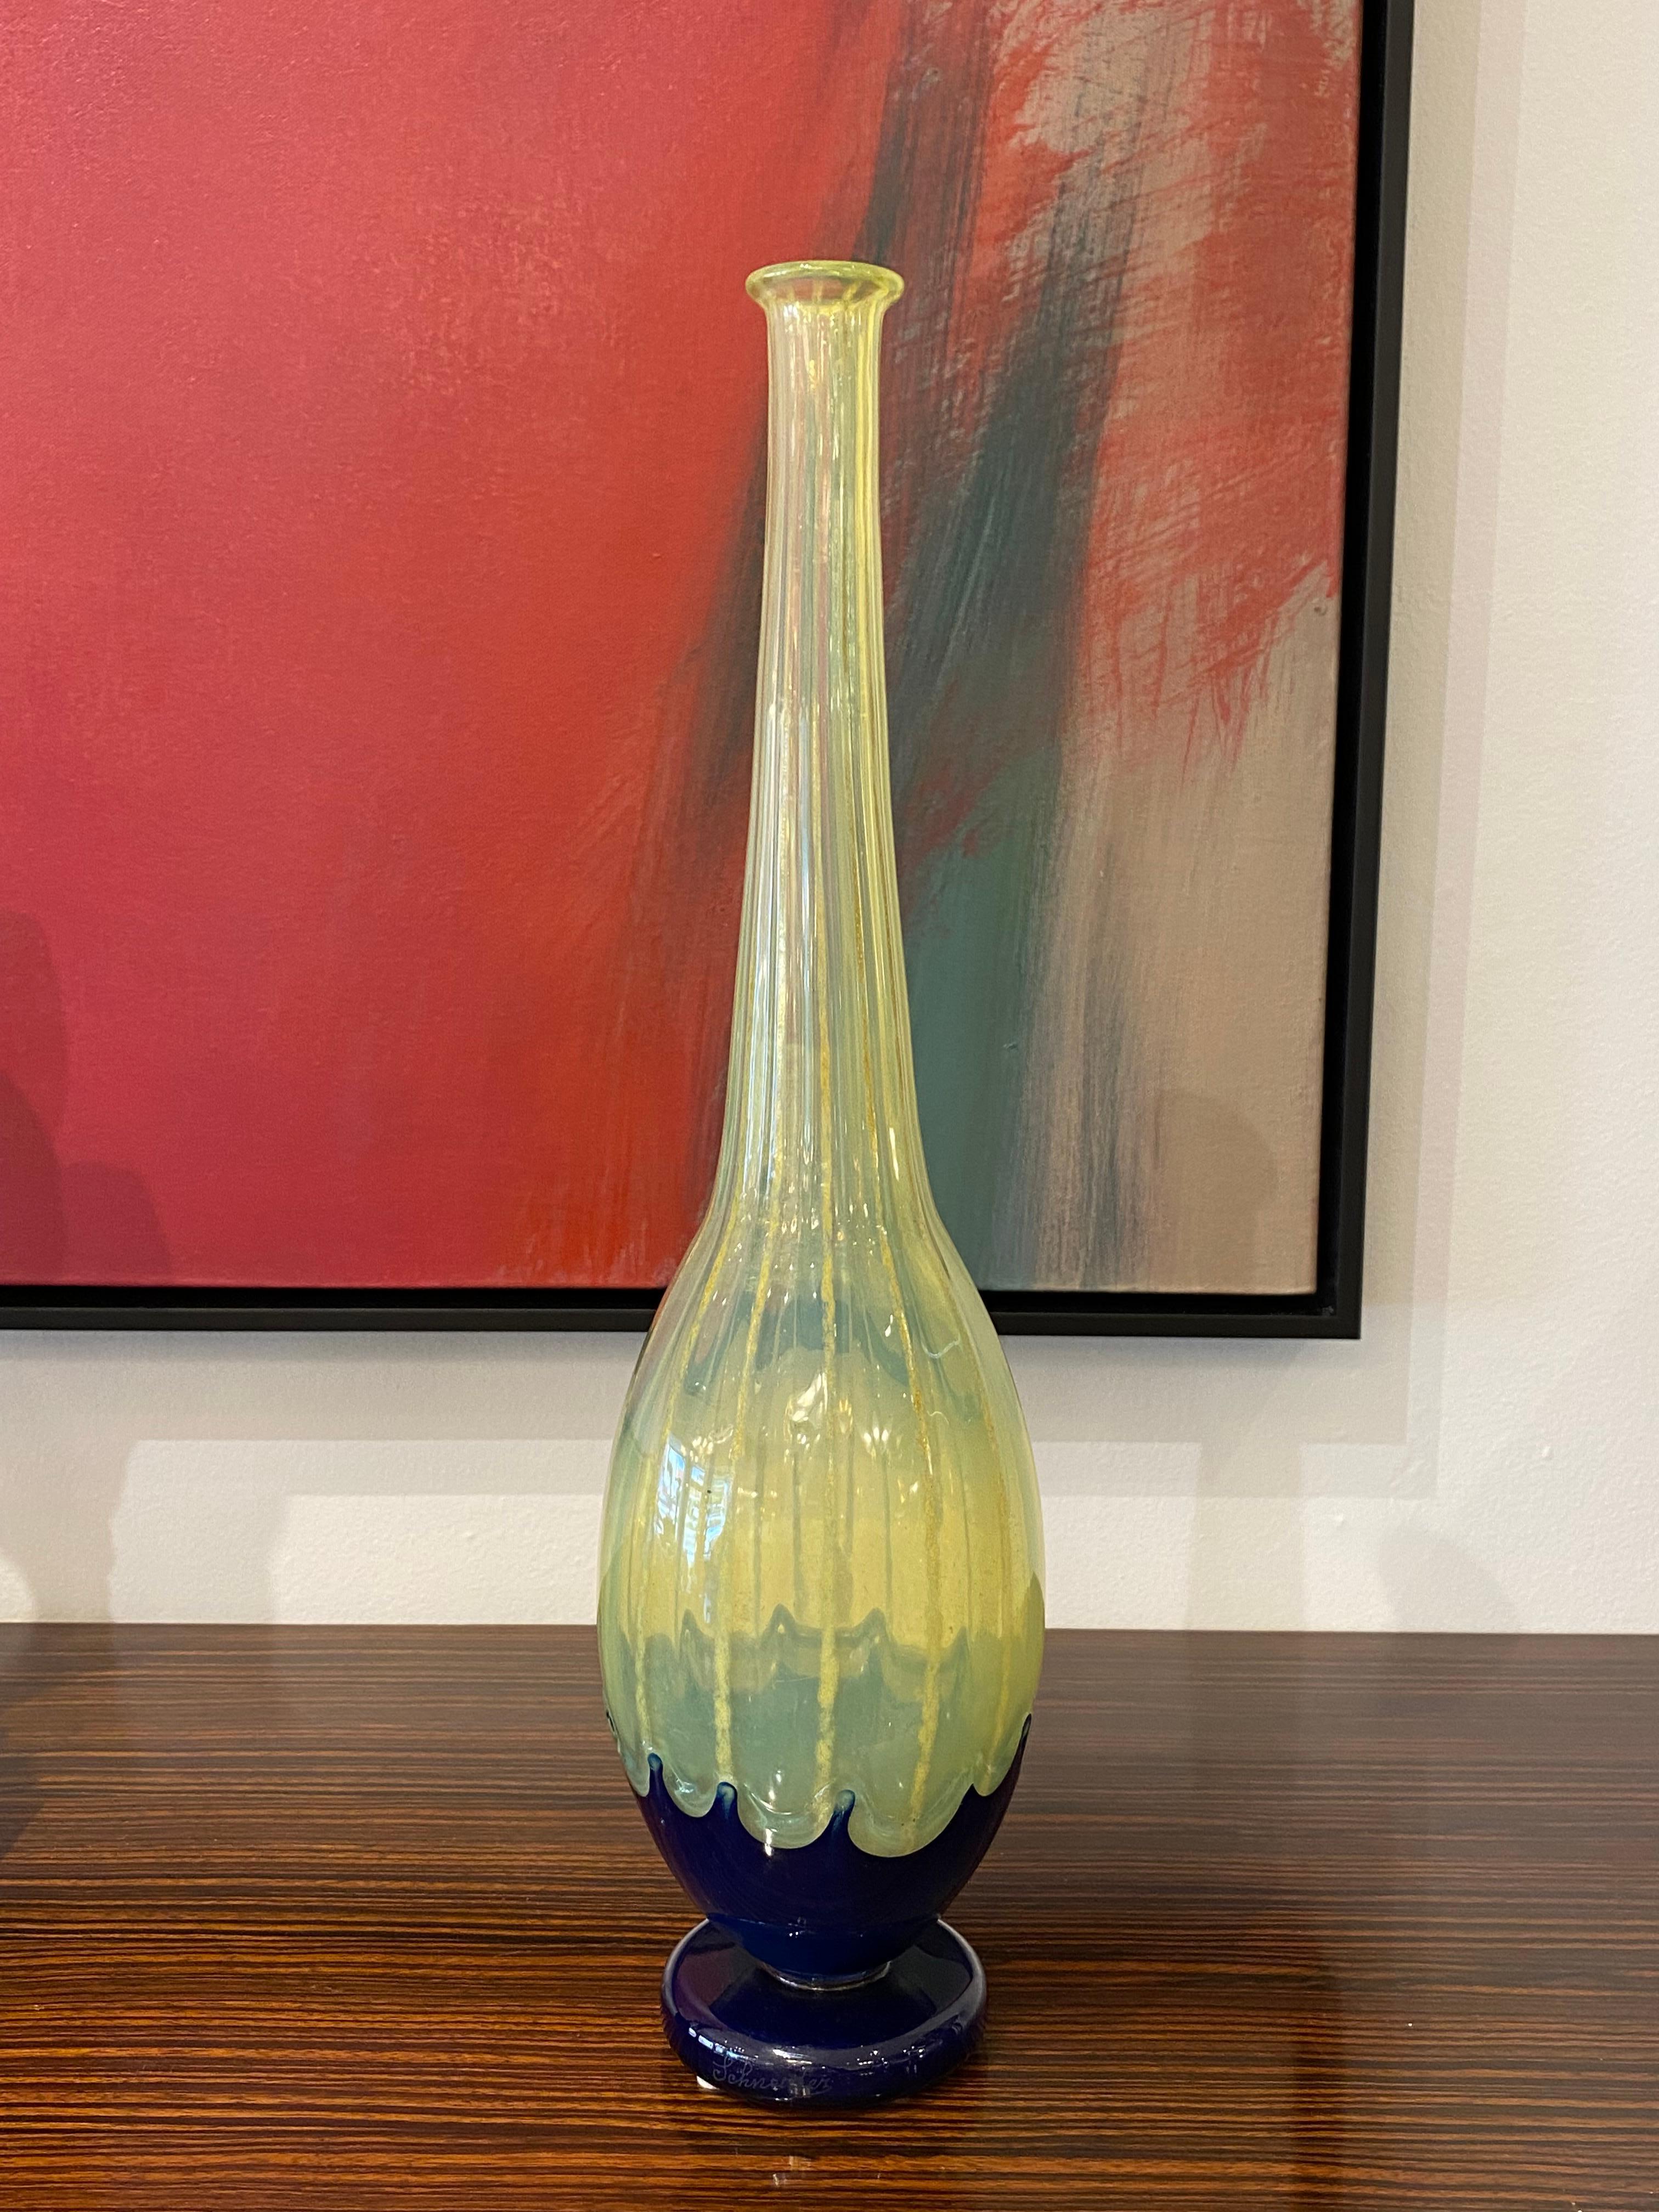 Art Deco glass vase by Charles Schneider in the filetes (threads) technique in neon yellow color and cobalt blue glass application.
Charles Schneider was a renowned glassmaker during the Art Deco period in France. He was known for his beautiful and